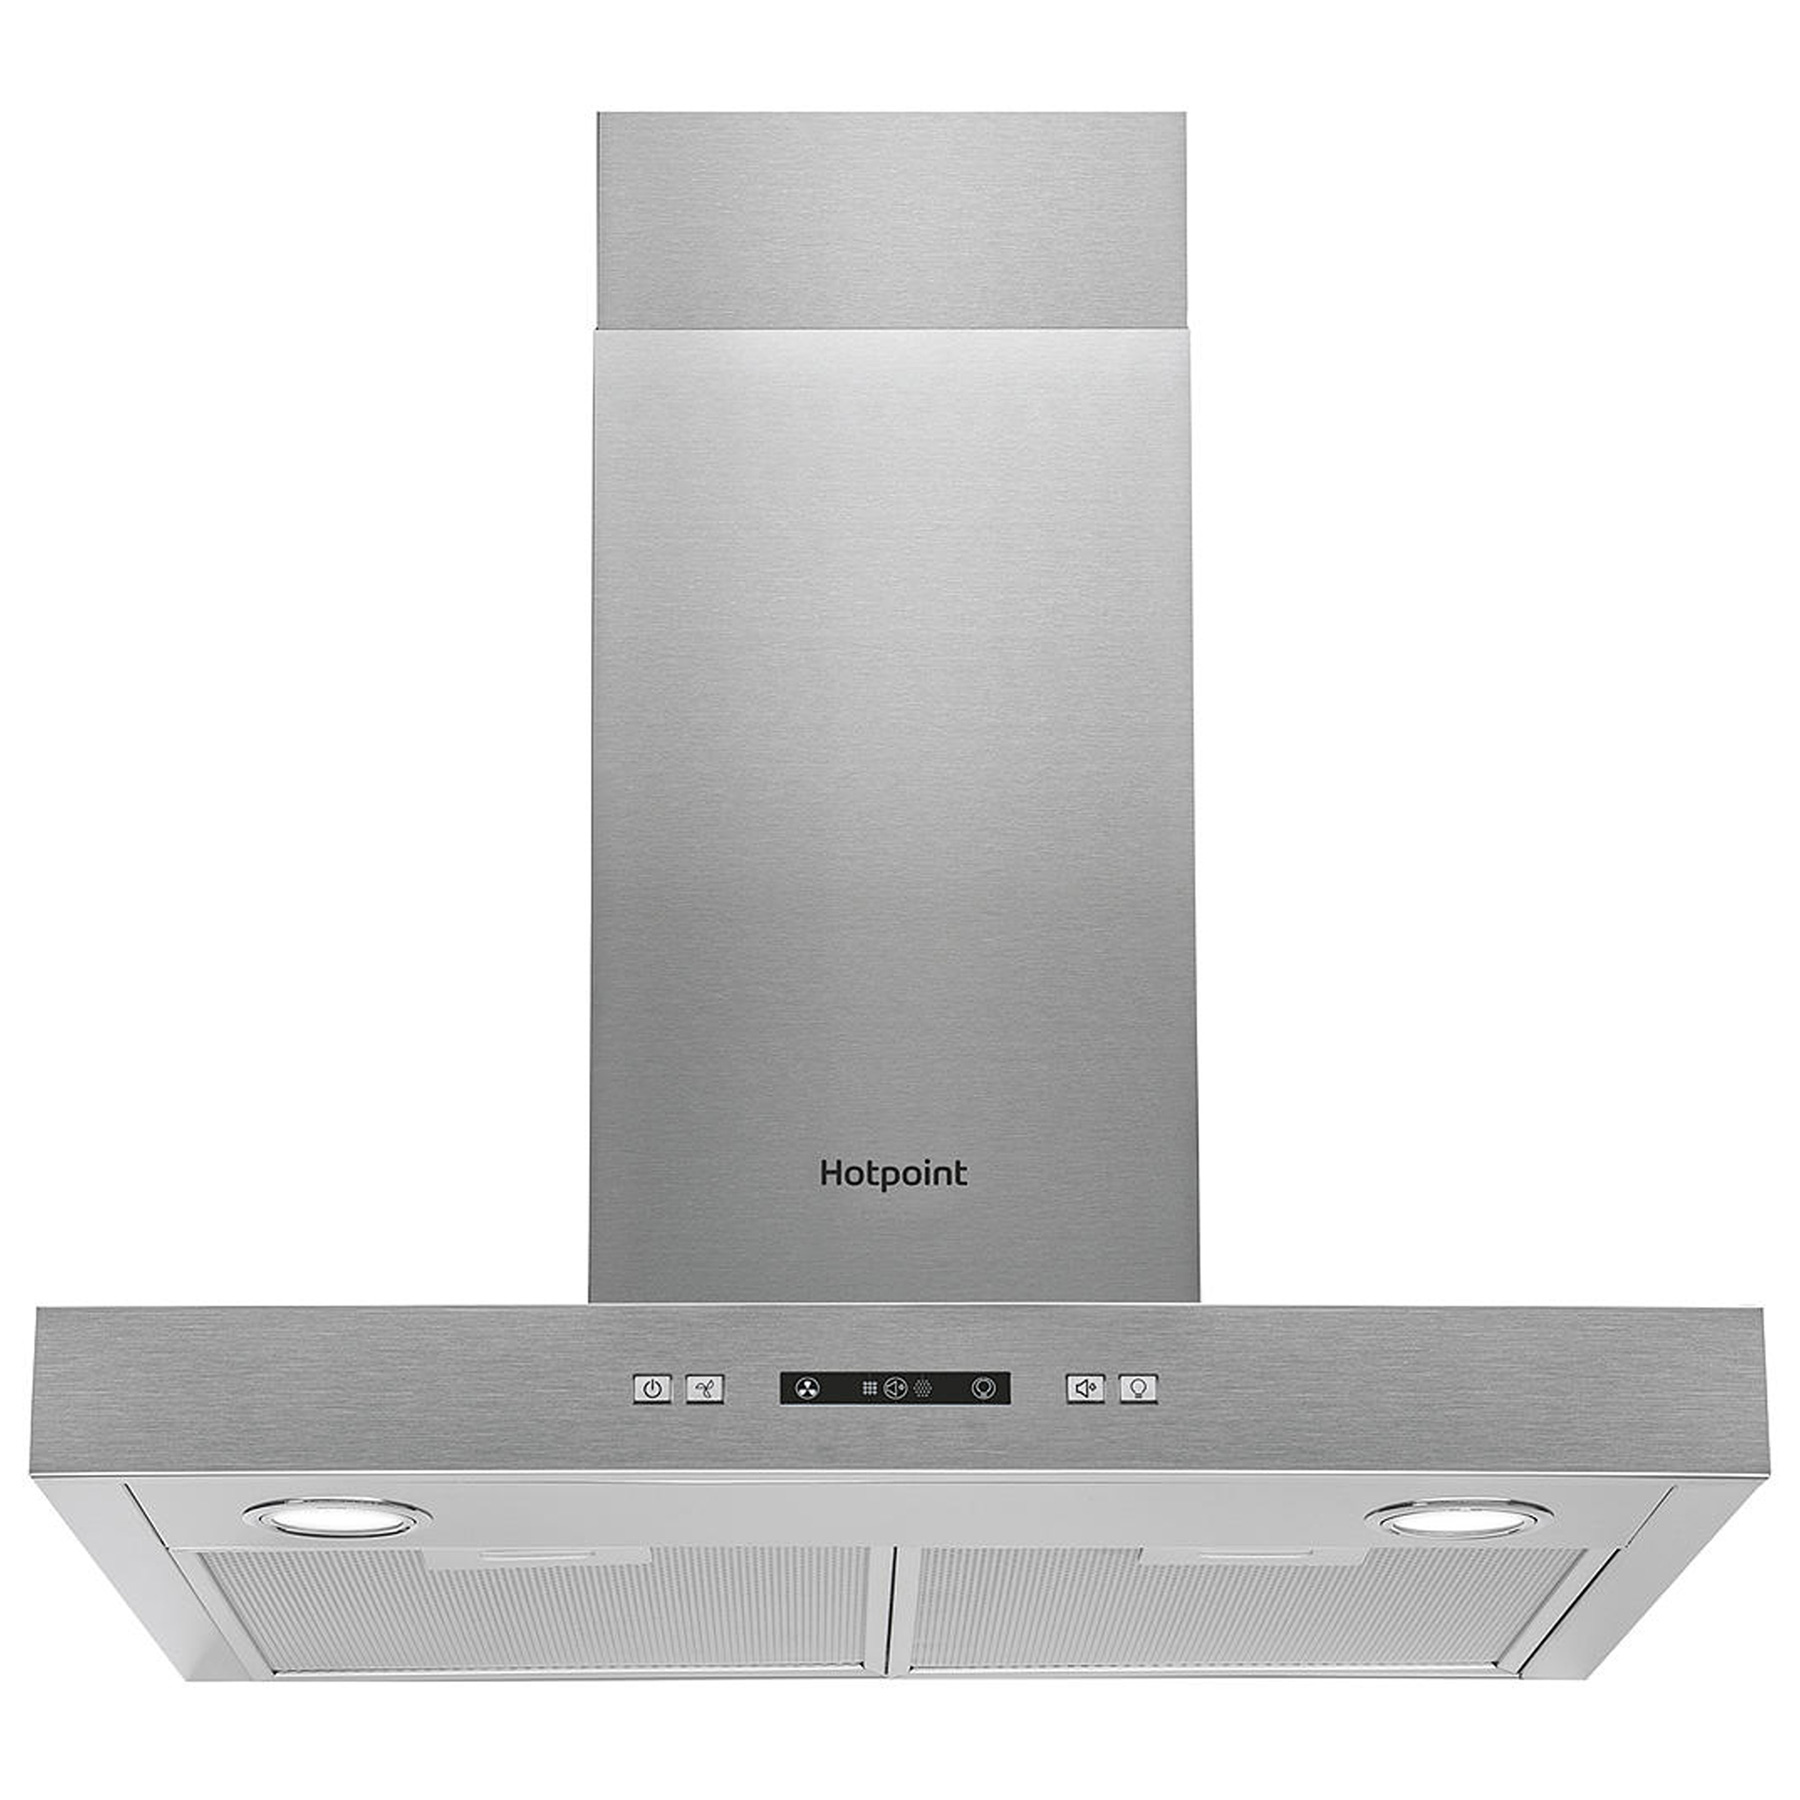 Image of Hotpoint PHBS67FLLIX 60cm Chimney Hood in Stainless Steel 3 Speed Fan